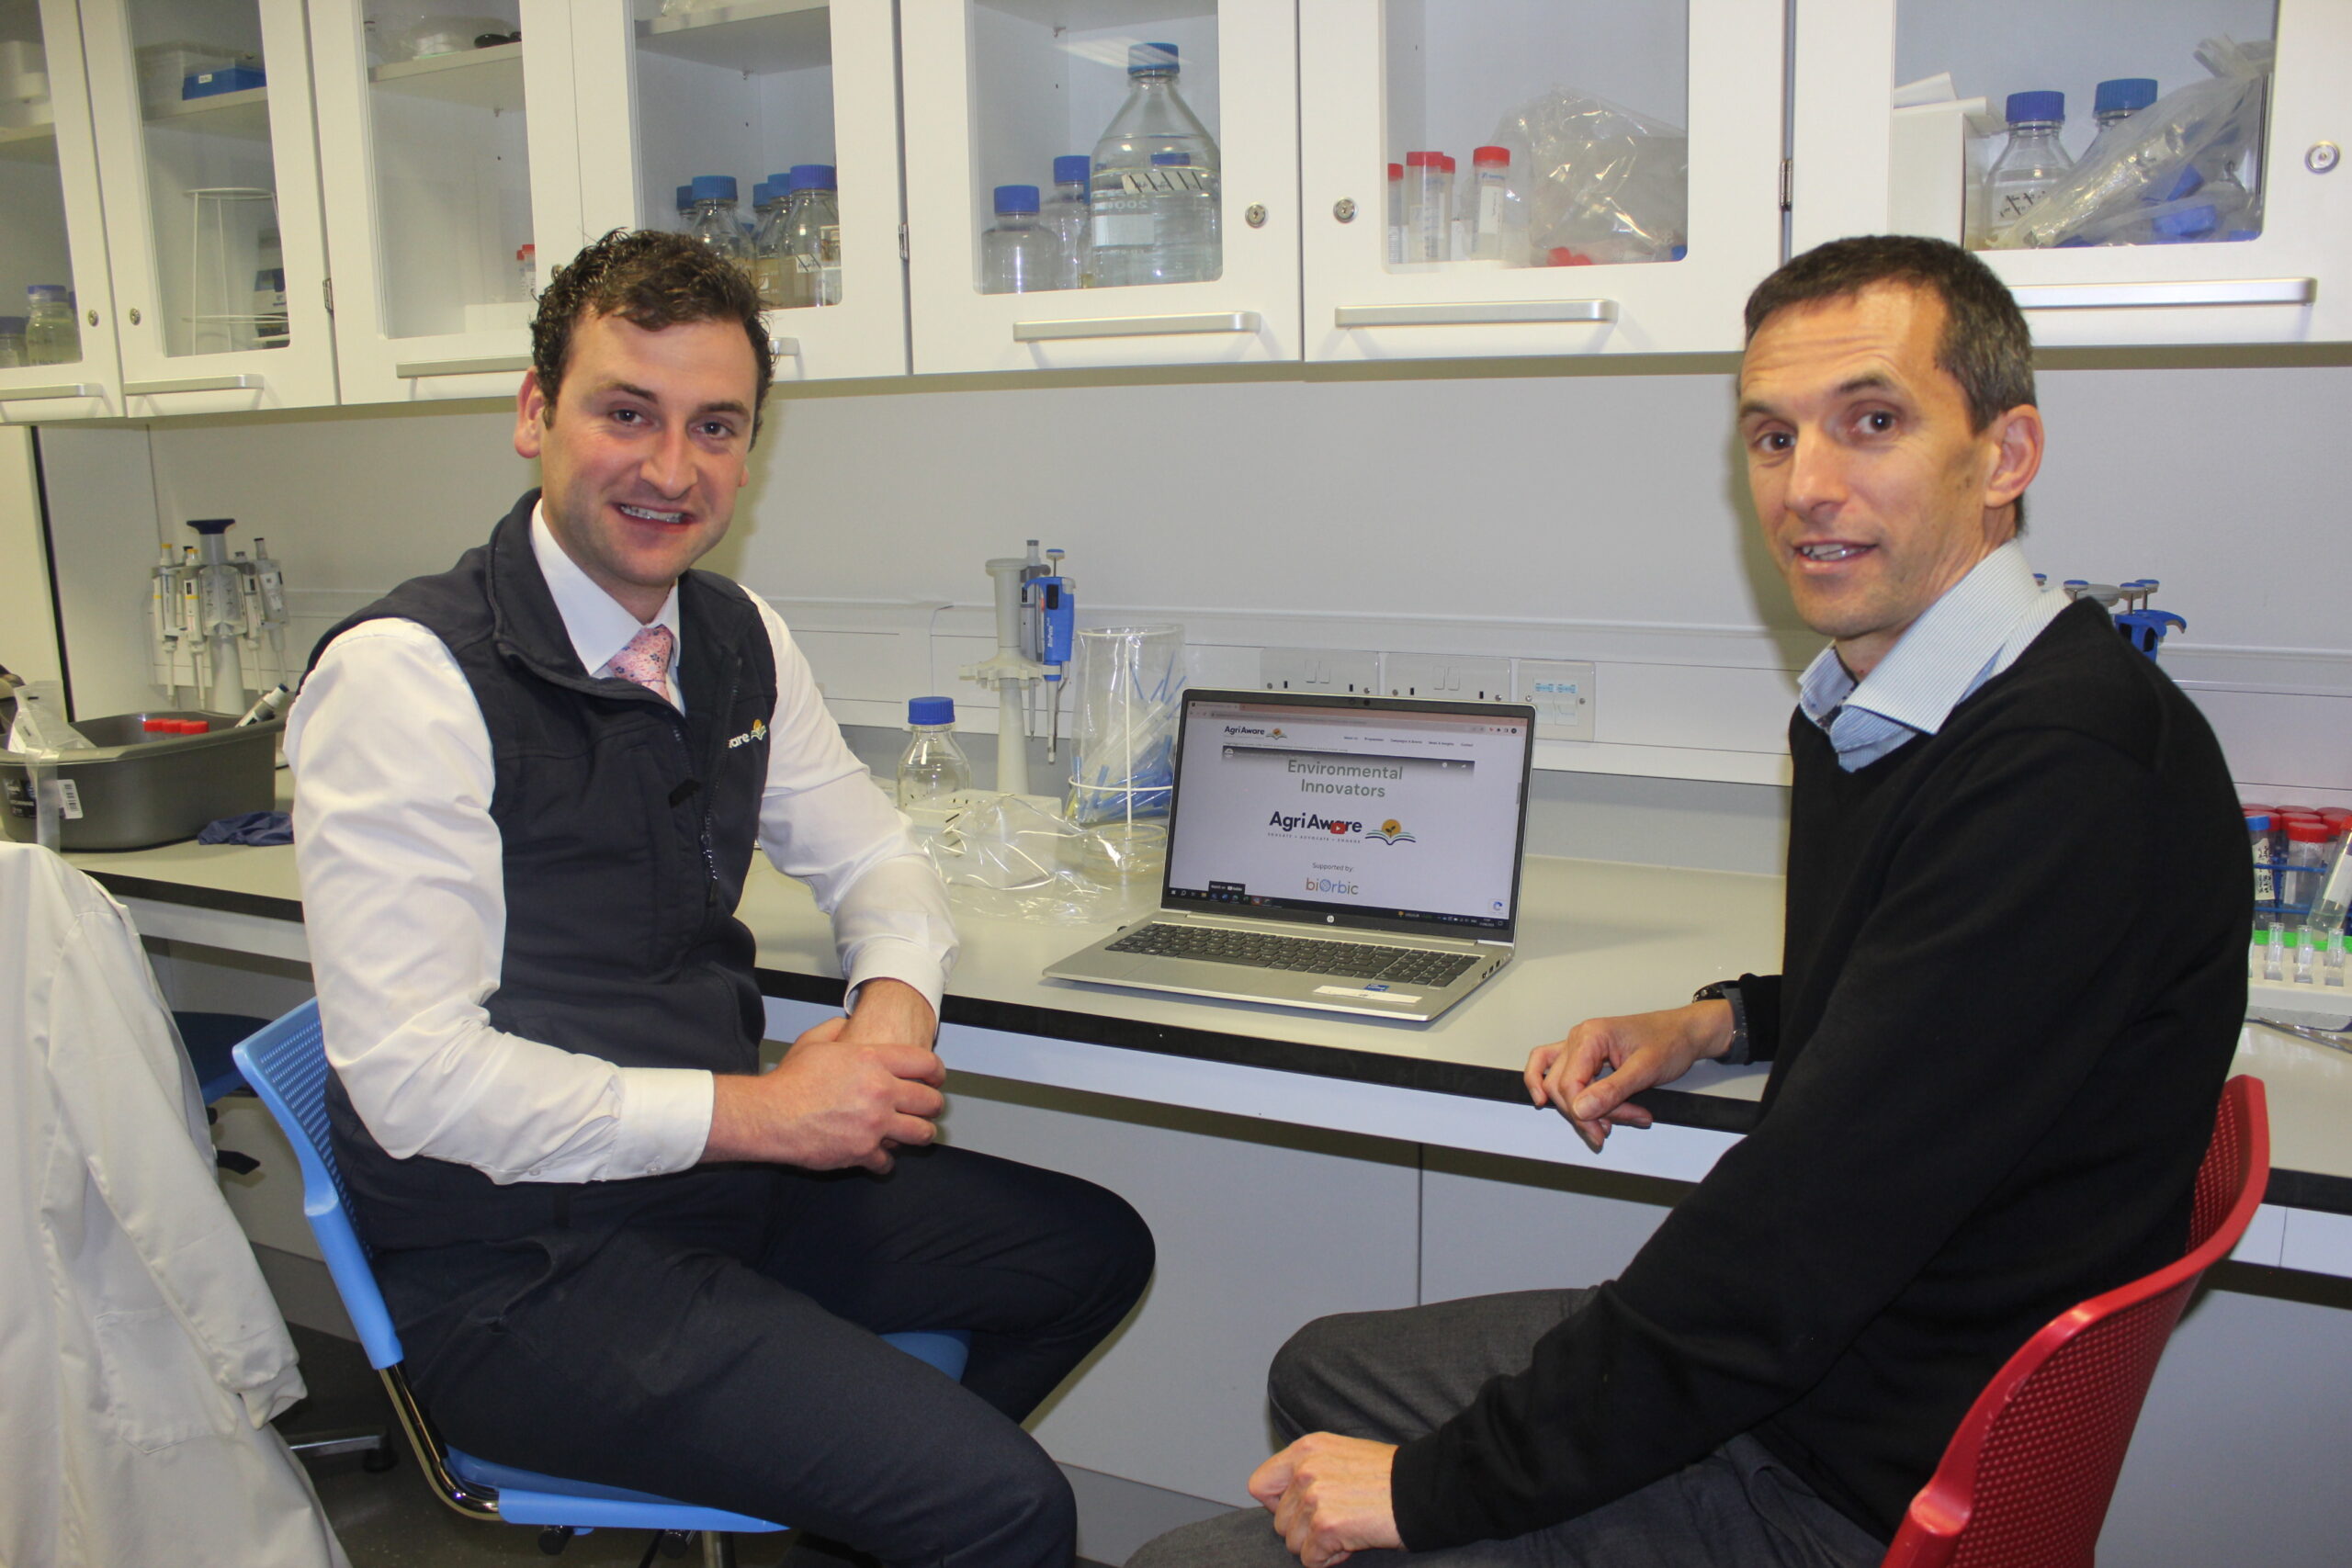 Agri Aware Executive Director Marcus O'Halloran and BiOrbic Director Kevin O'Connor at the UCD O'Brien Centre for Science